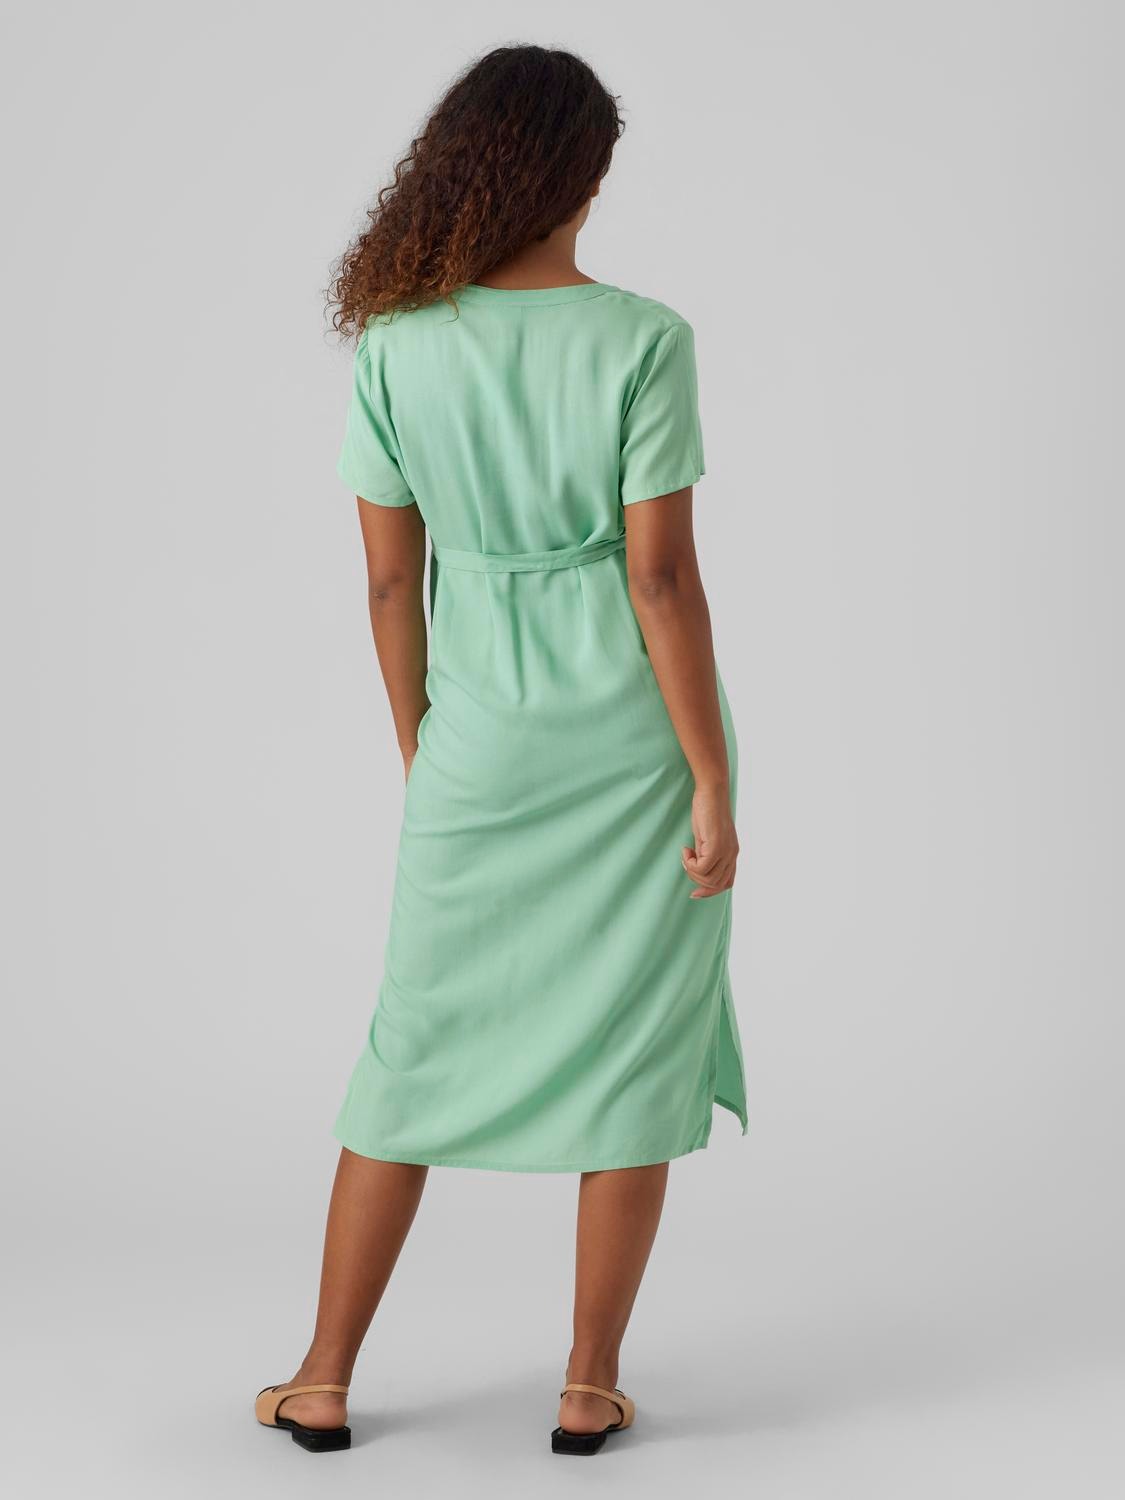 MAMA.LICIOUS Umstands-Kleid -Neptune Green - 20018814